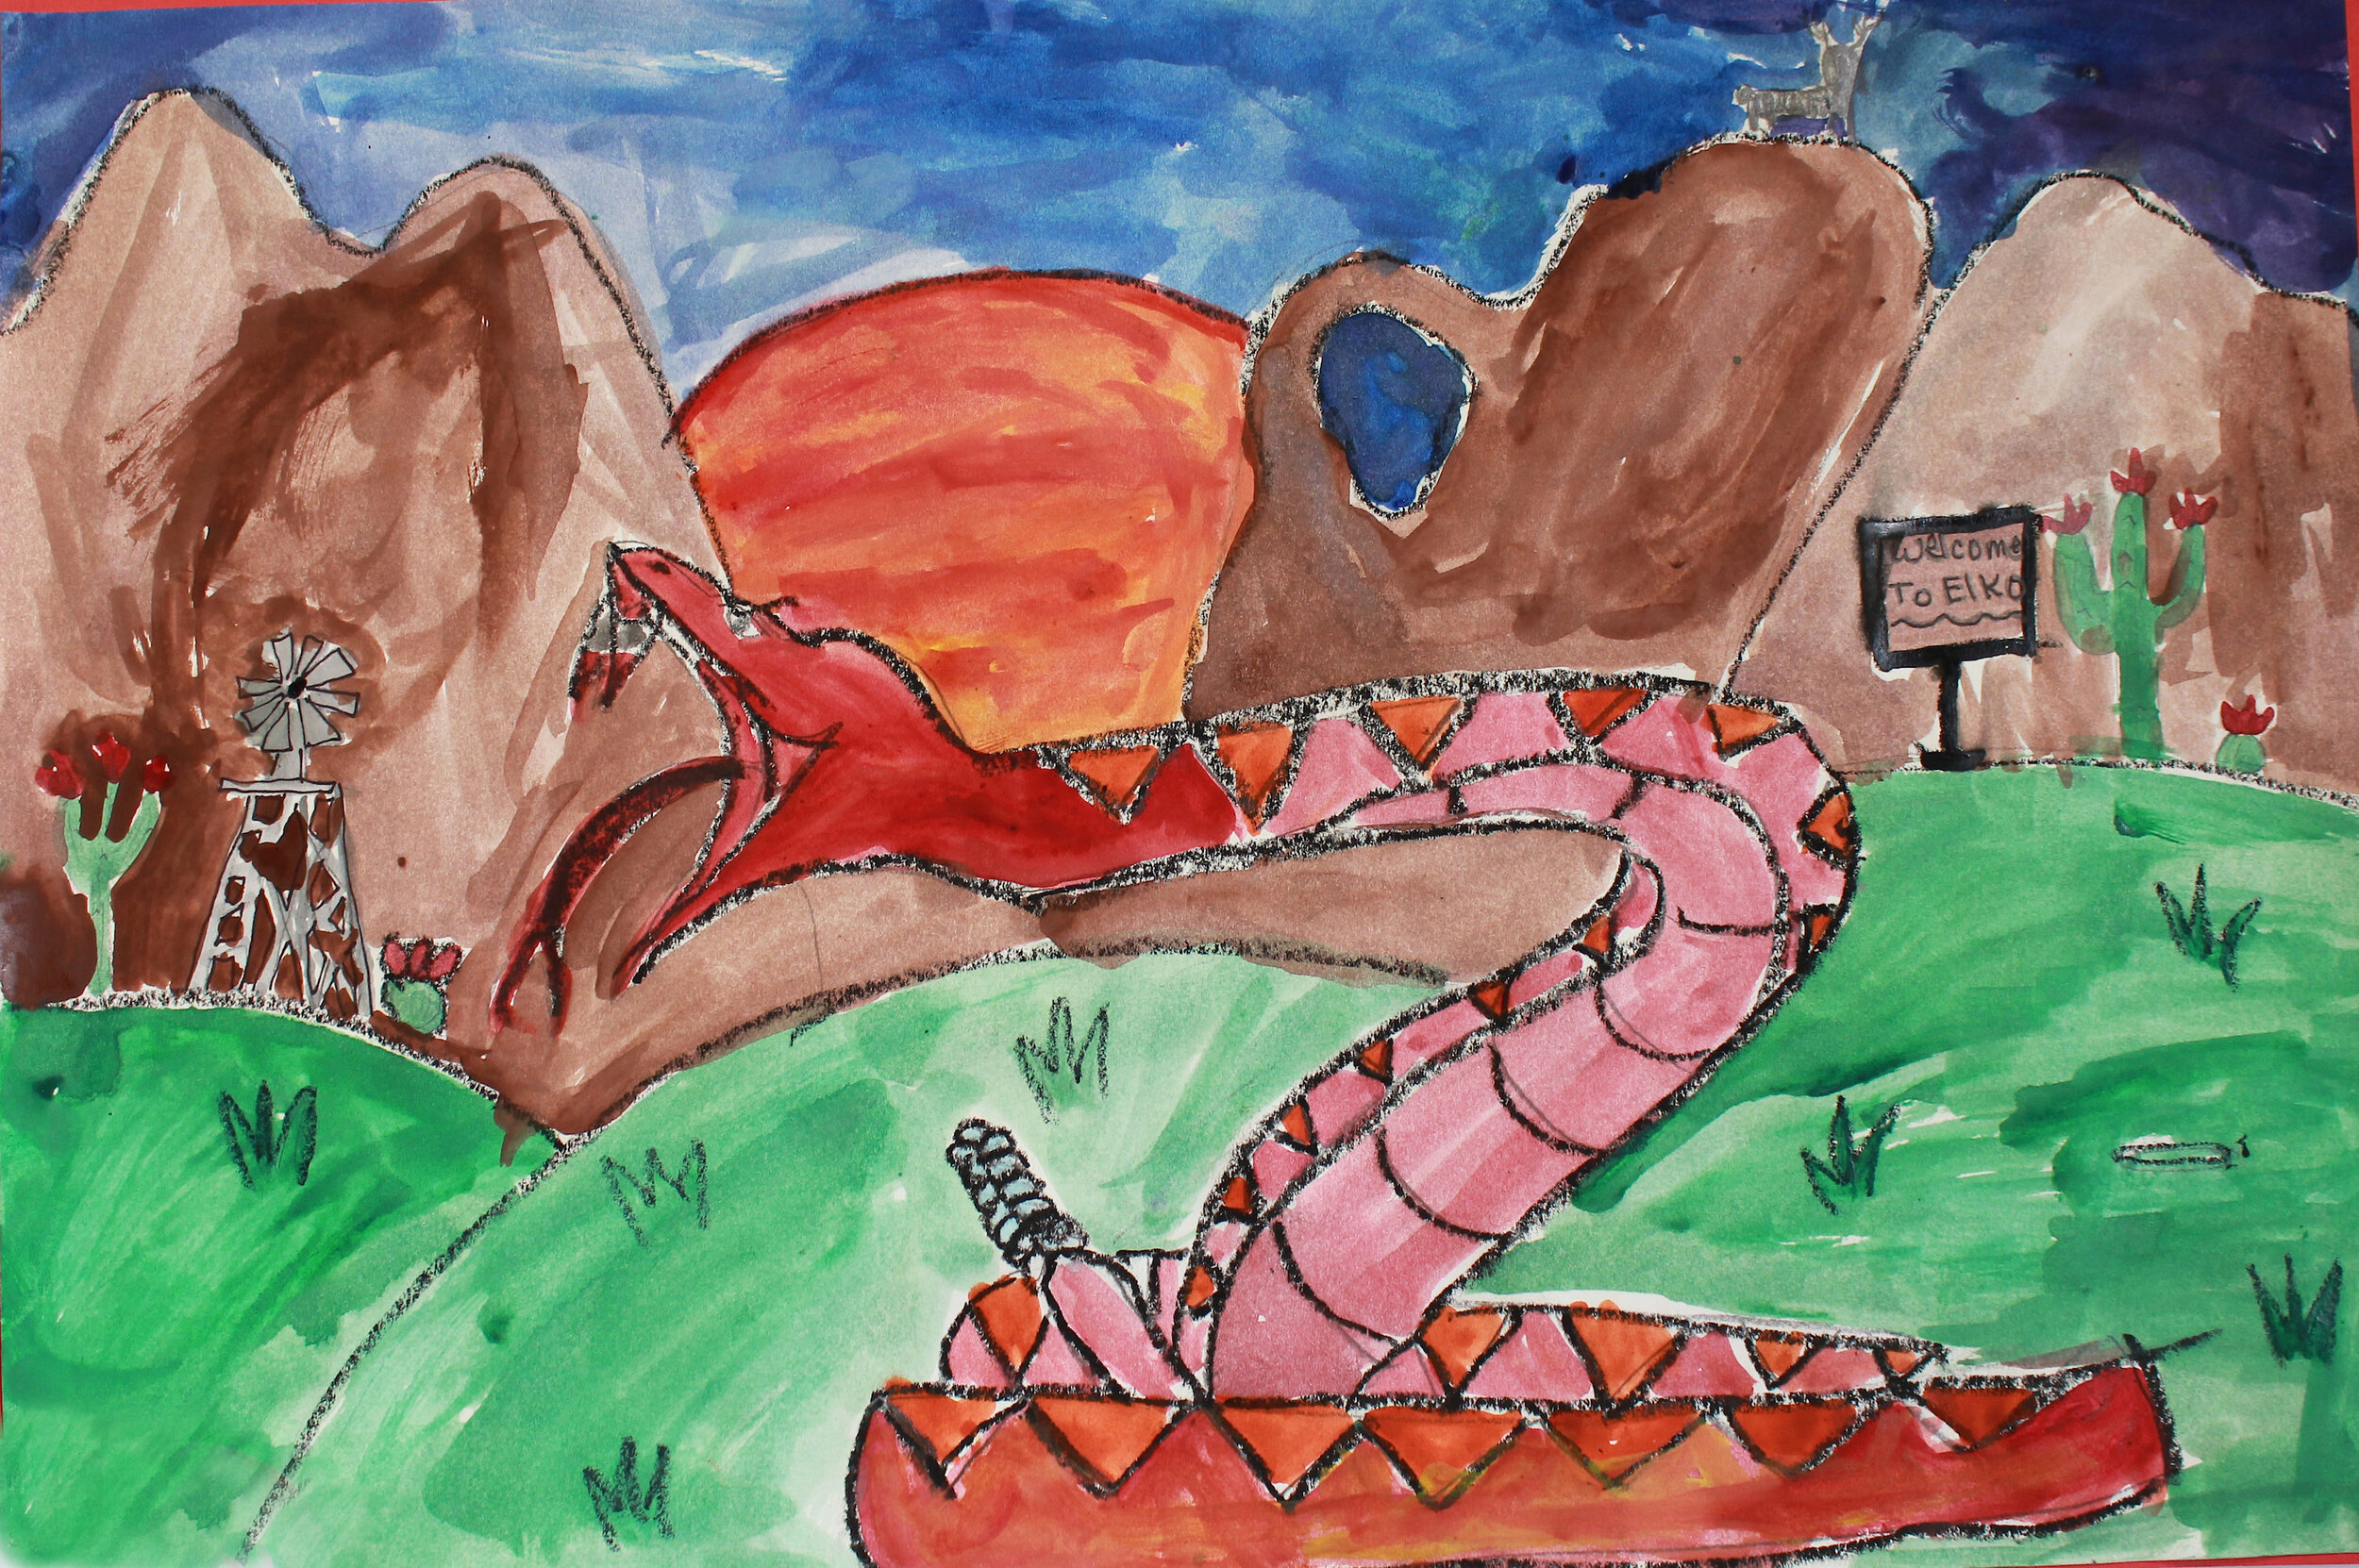 Olivia_Grade 6_Rattler_Watercolor and Charcoal s.jpg